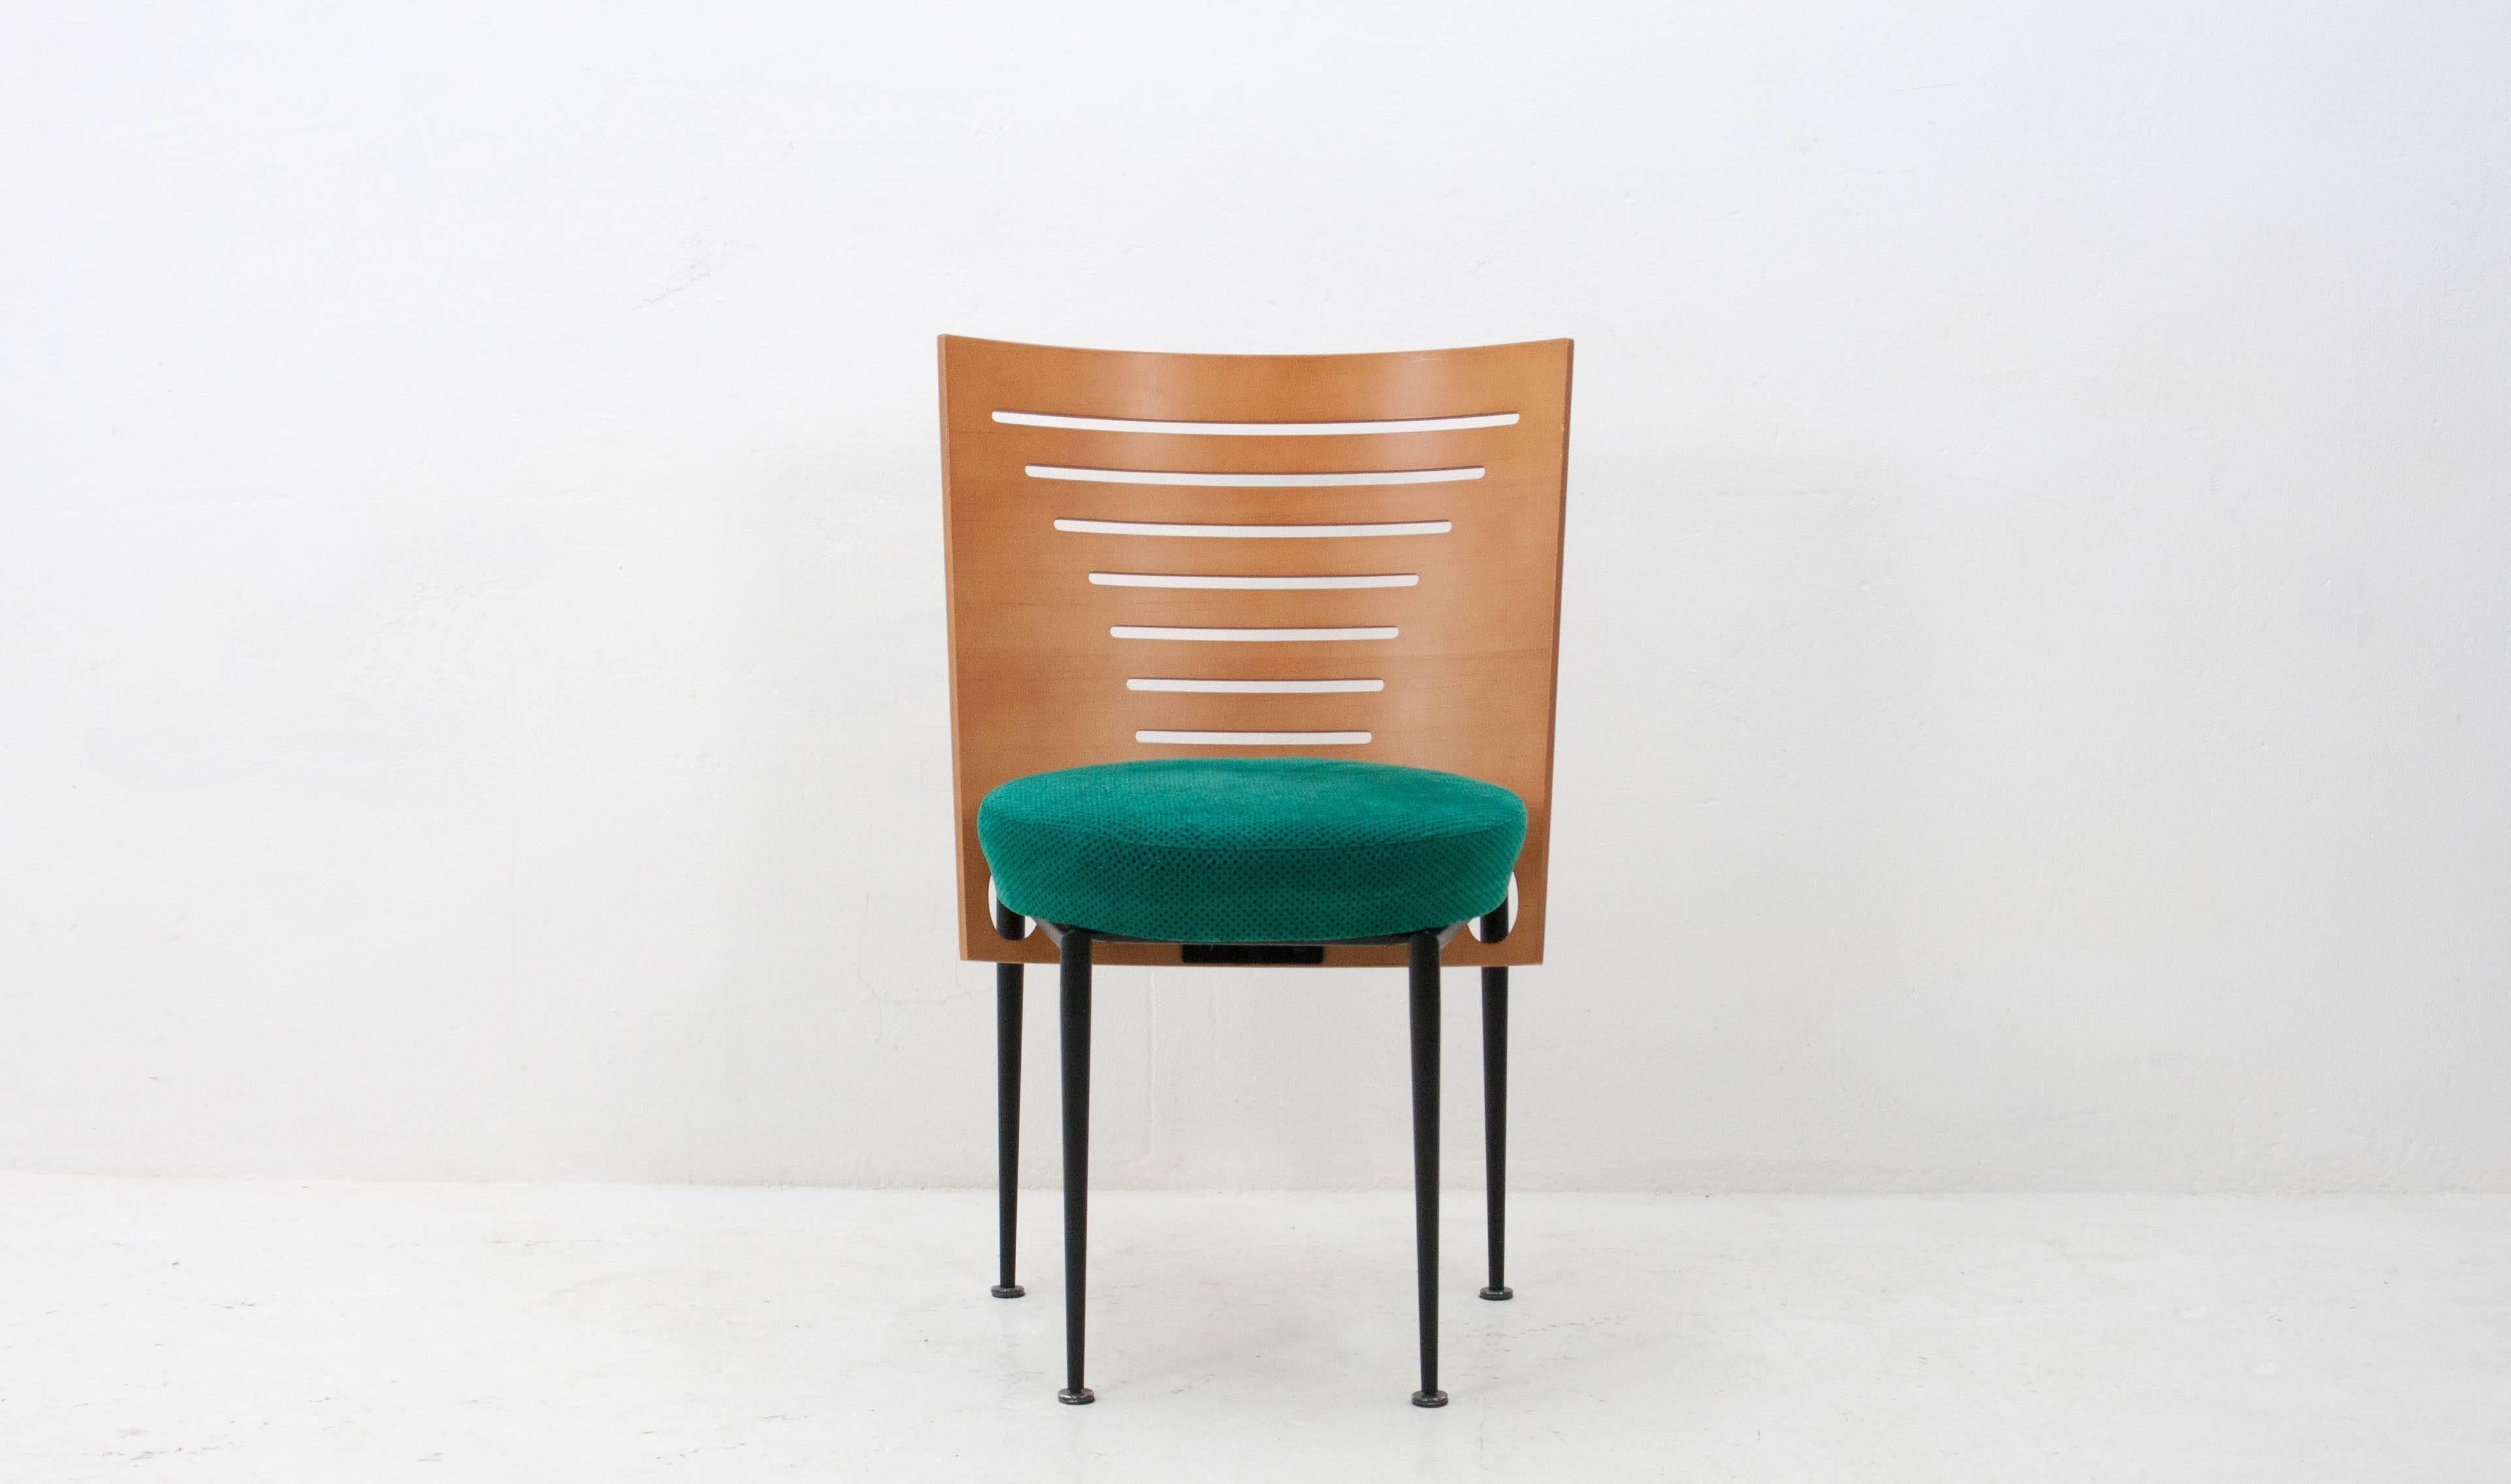 Attractive and well-built designer chair from the 1990s. Very similar in style to Ruud Jan Kokke's designs for Harvink but we've been unable to pin it down. Curved plywood back, steel frame and a very 1990s green fabric seat.